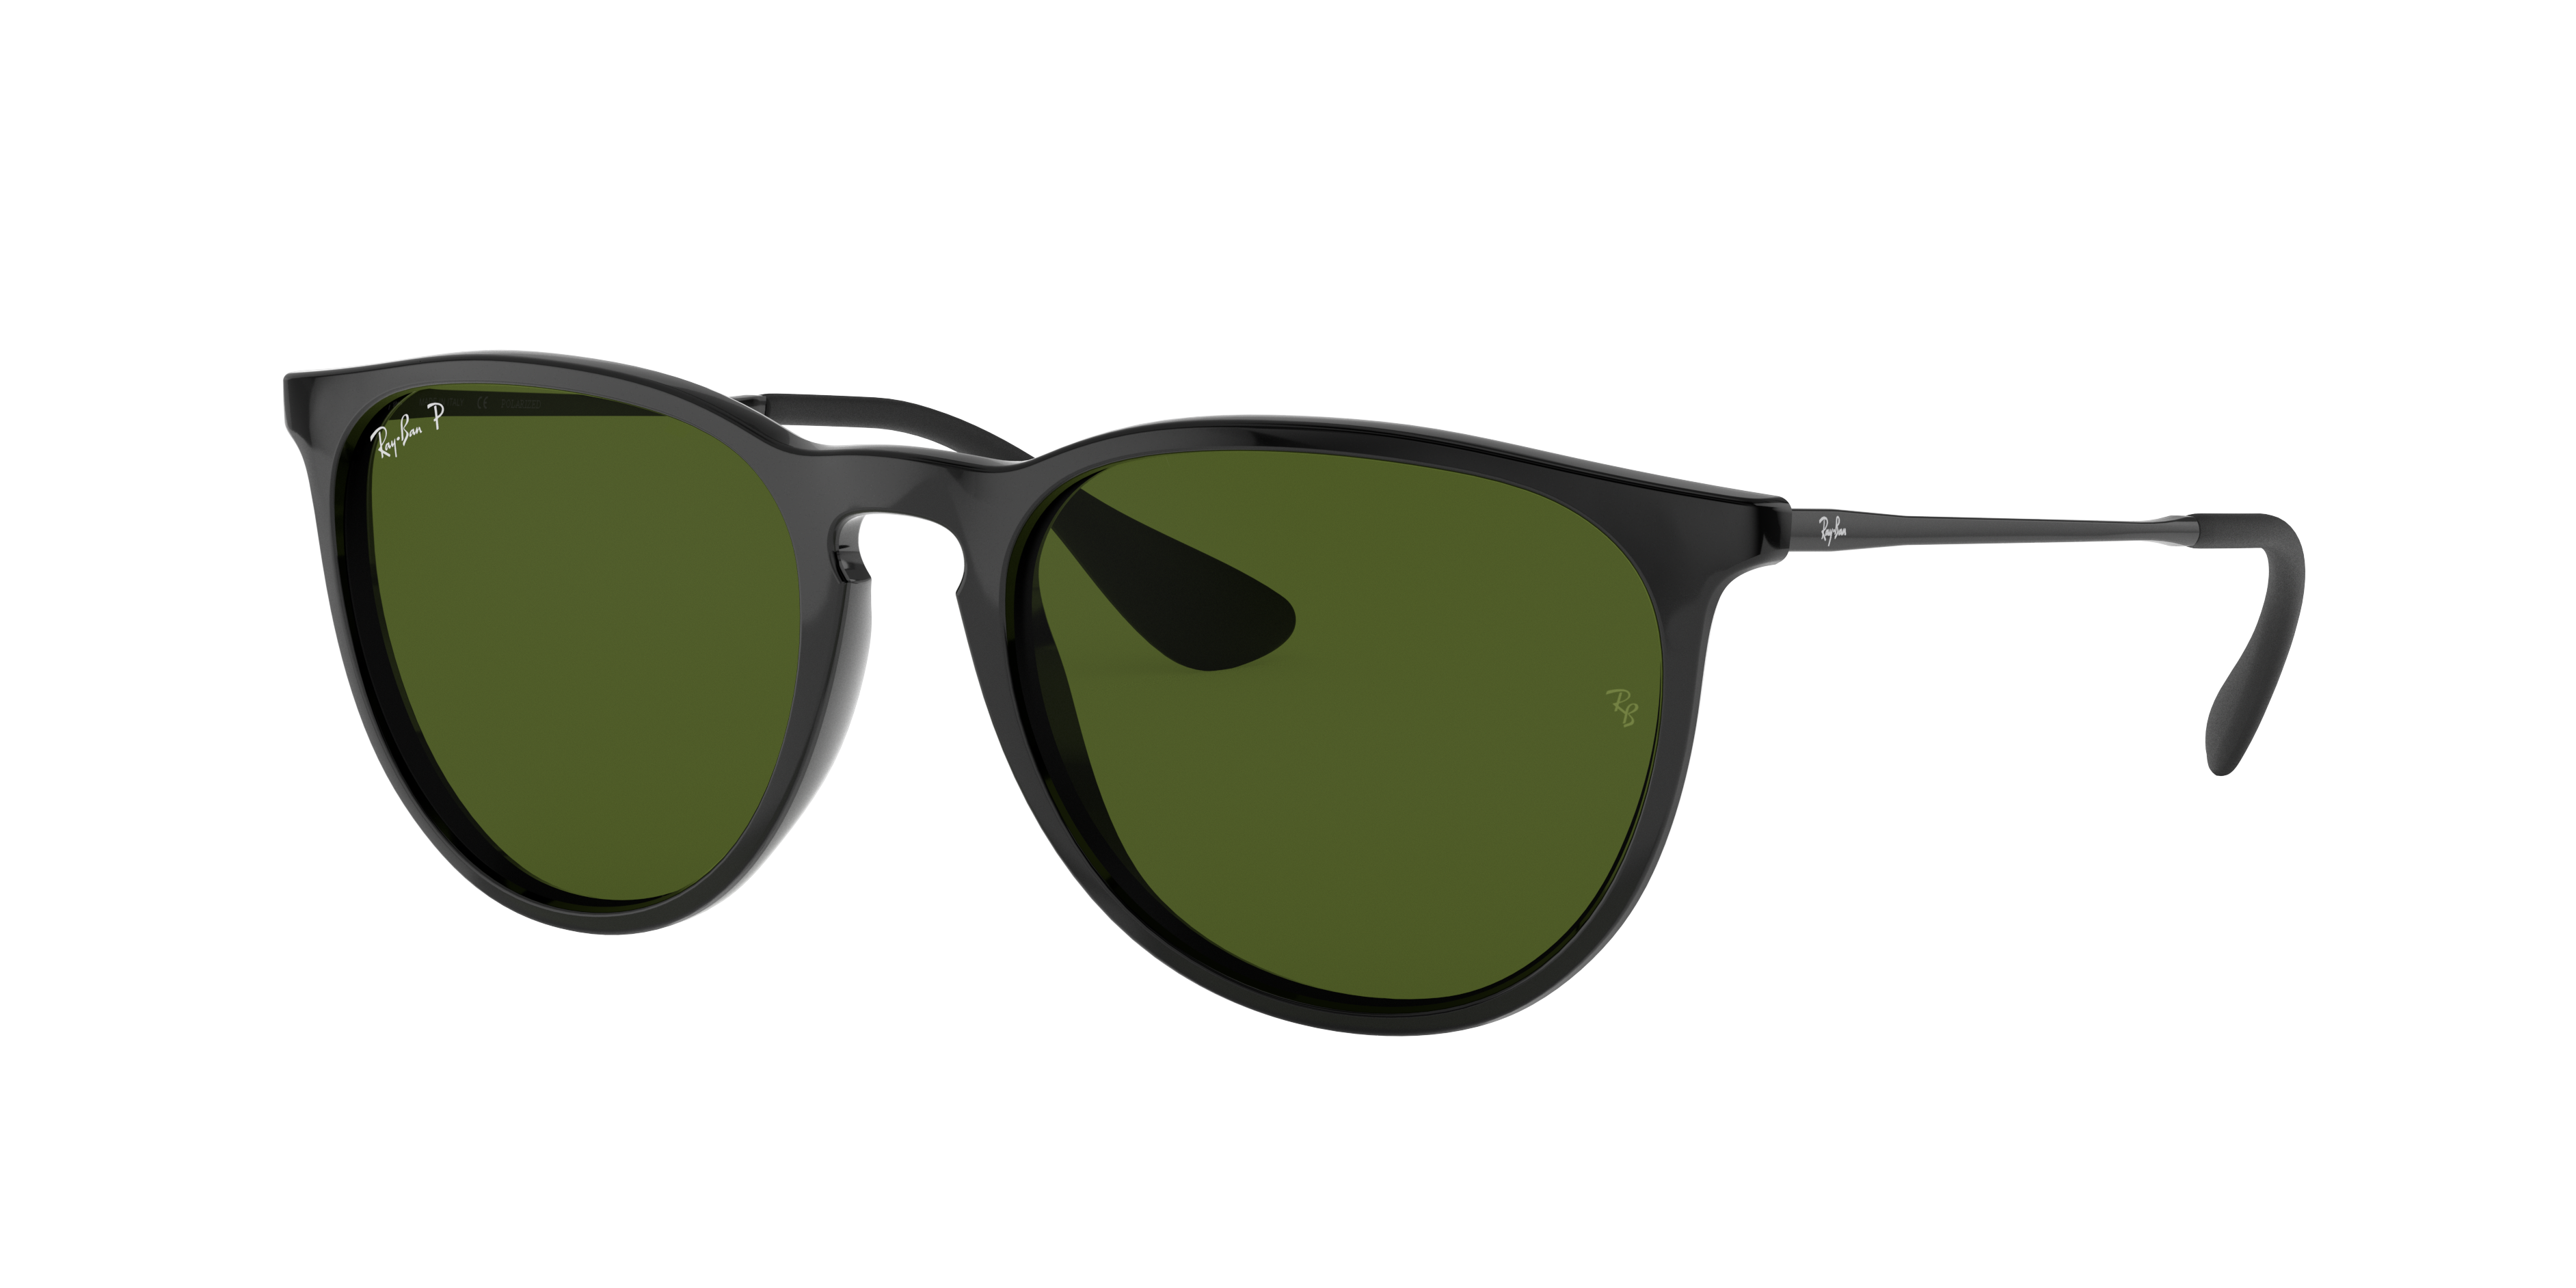 Ray-Ban 0RB4171F in Black Sunglasses | OPSM